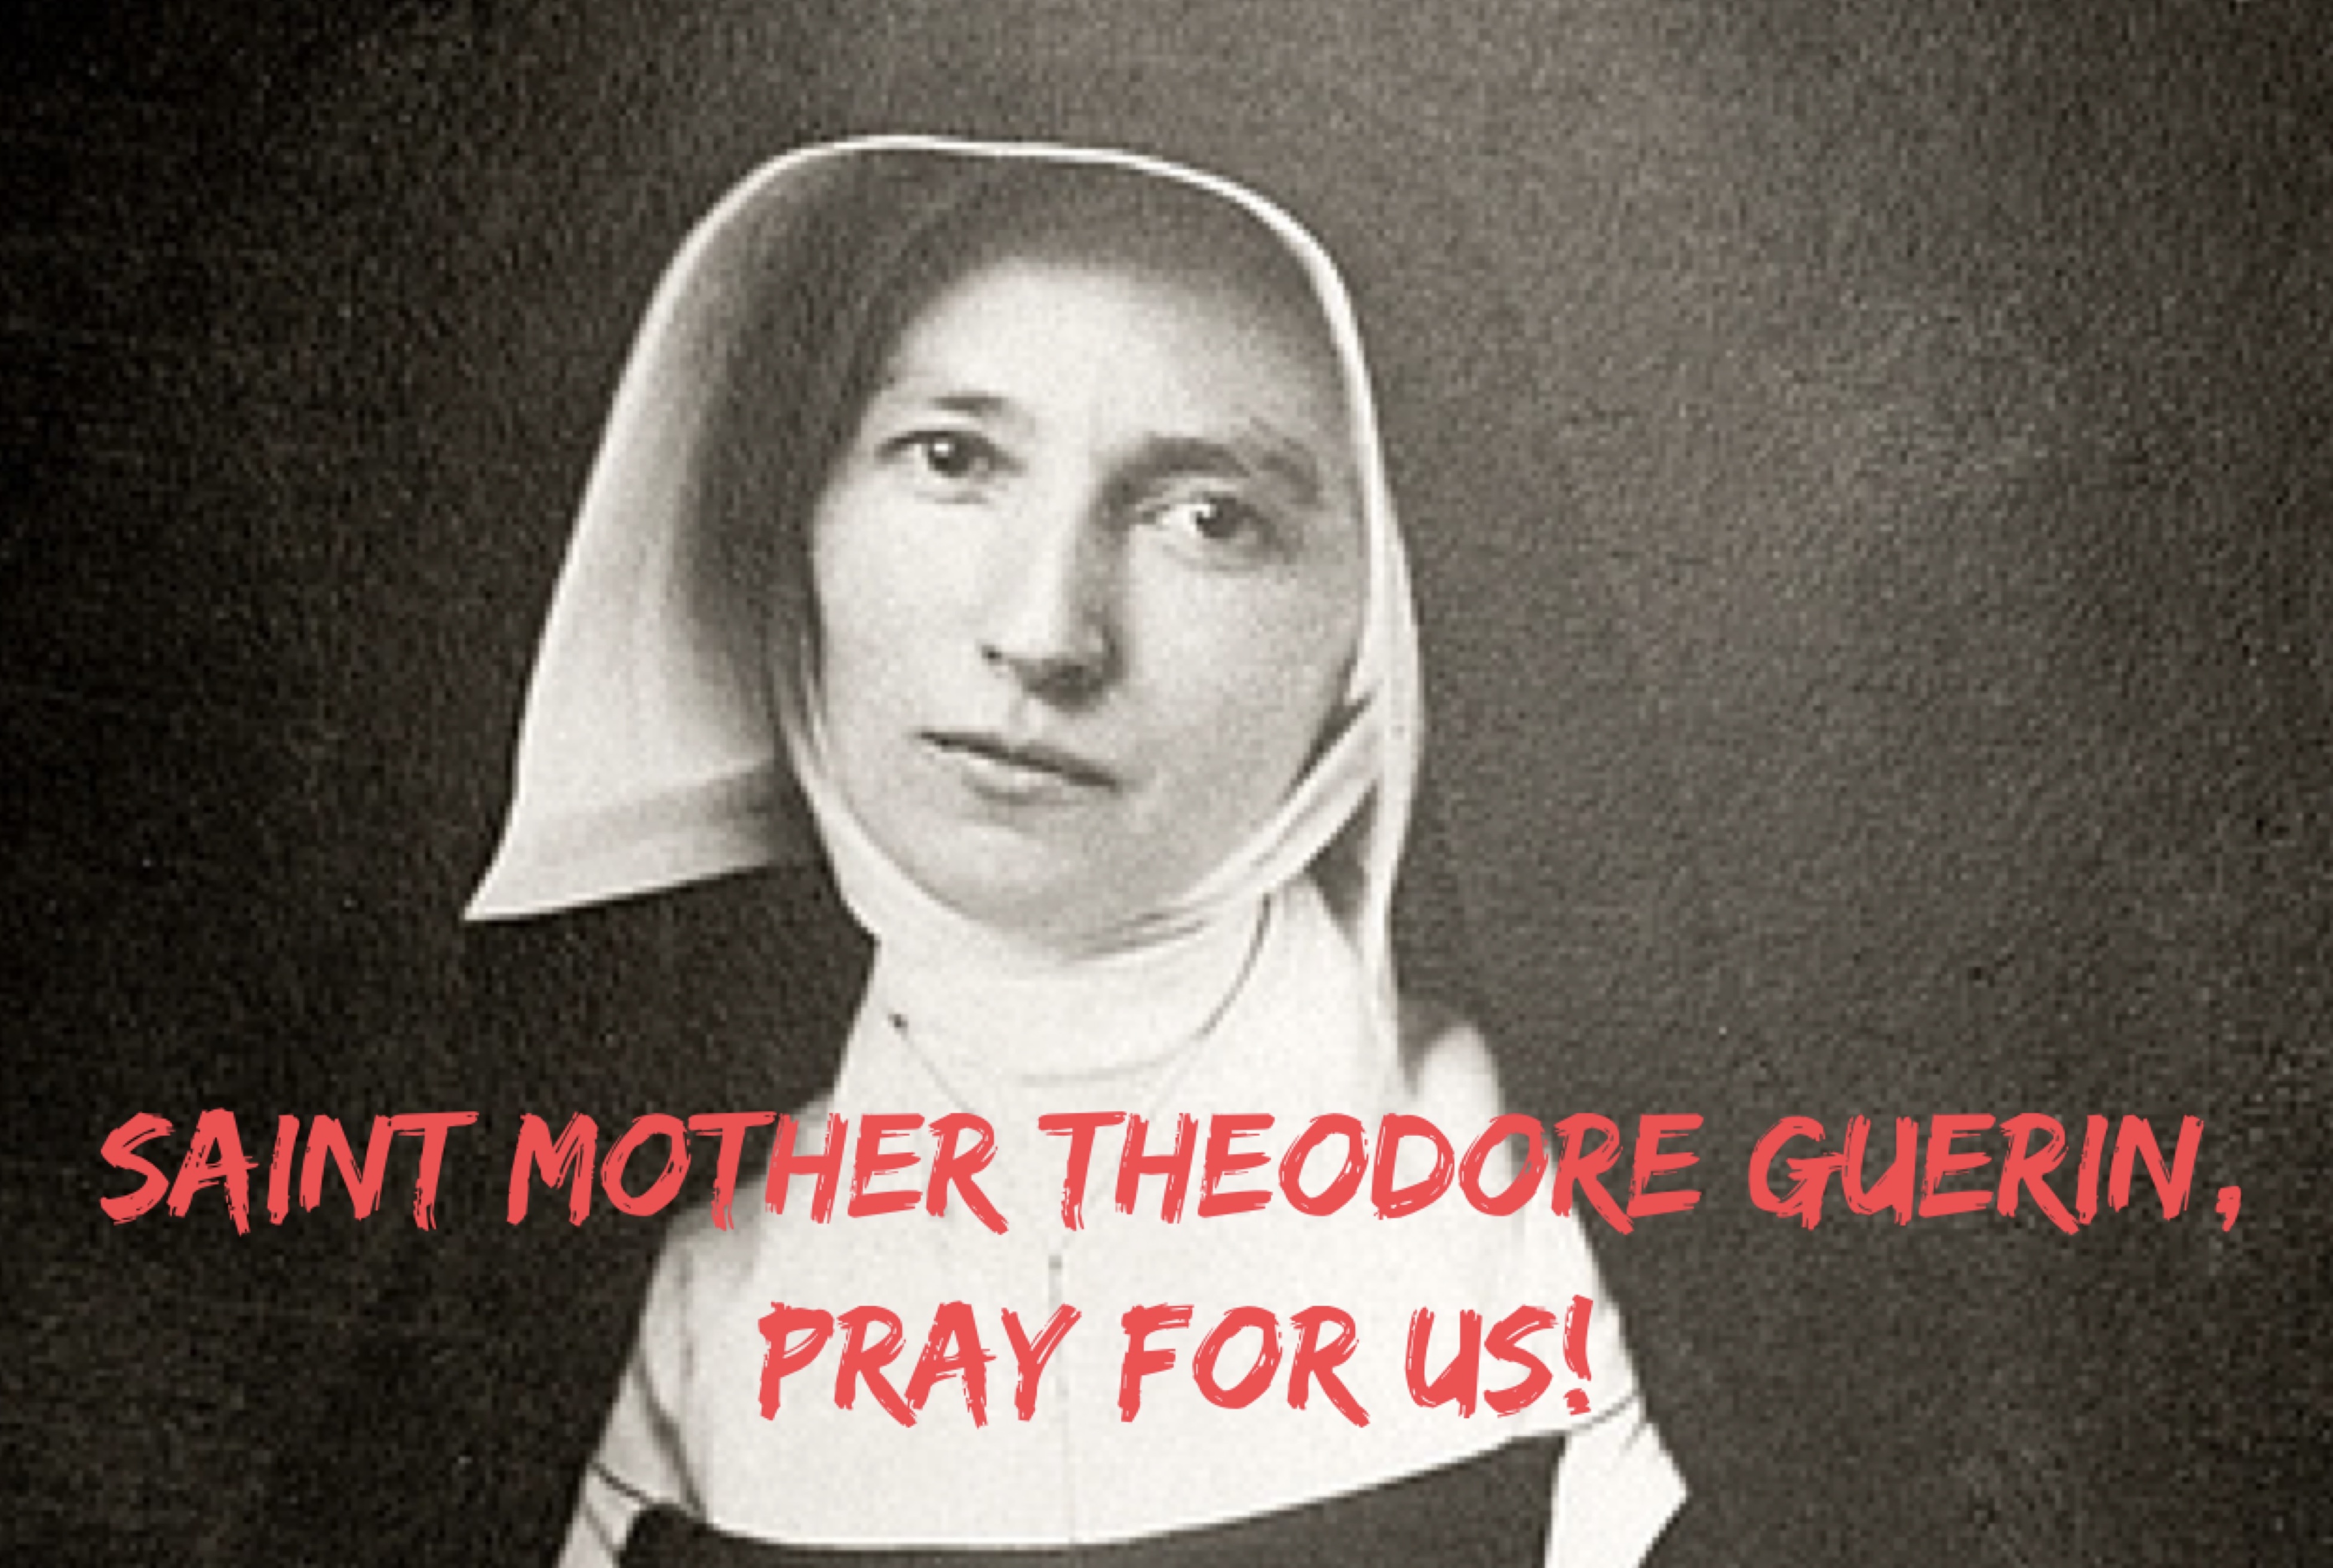 3rd October - Saint Mother Theodore Guerin